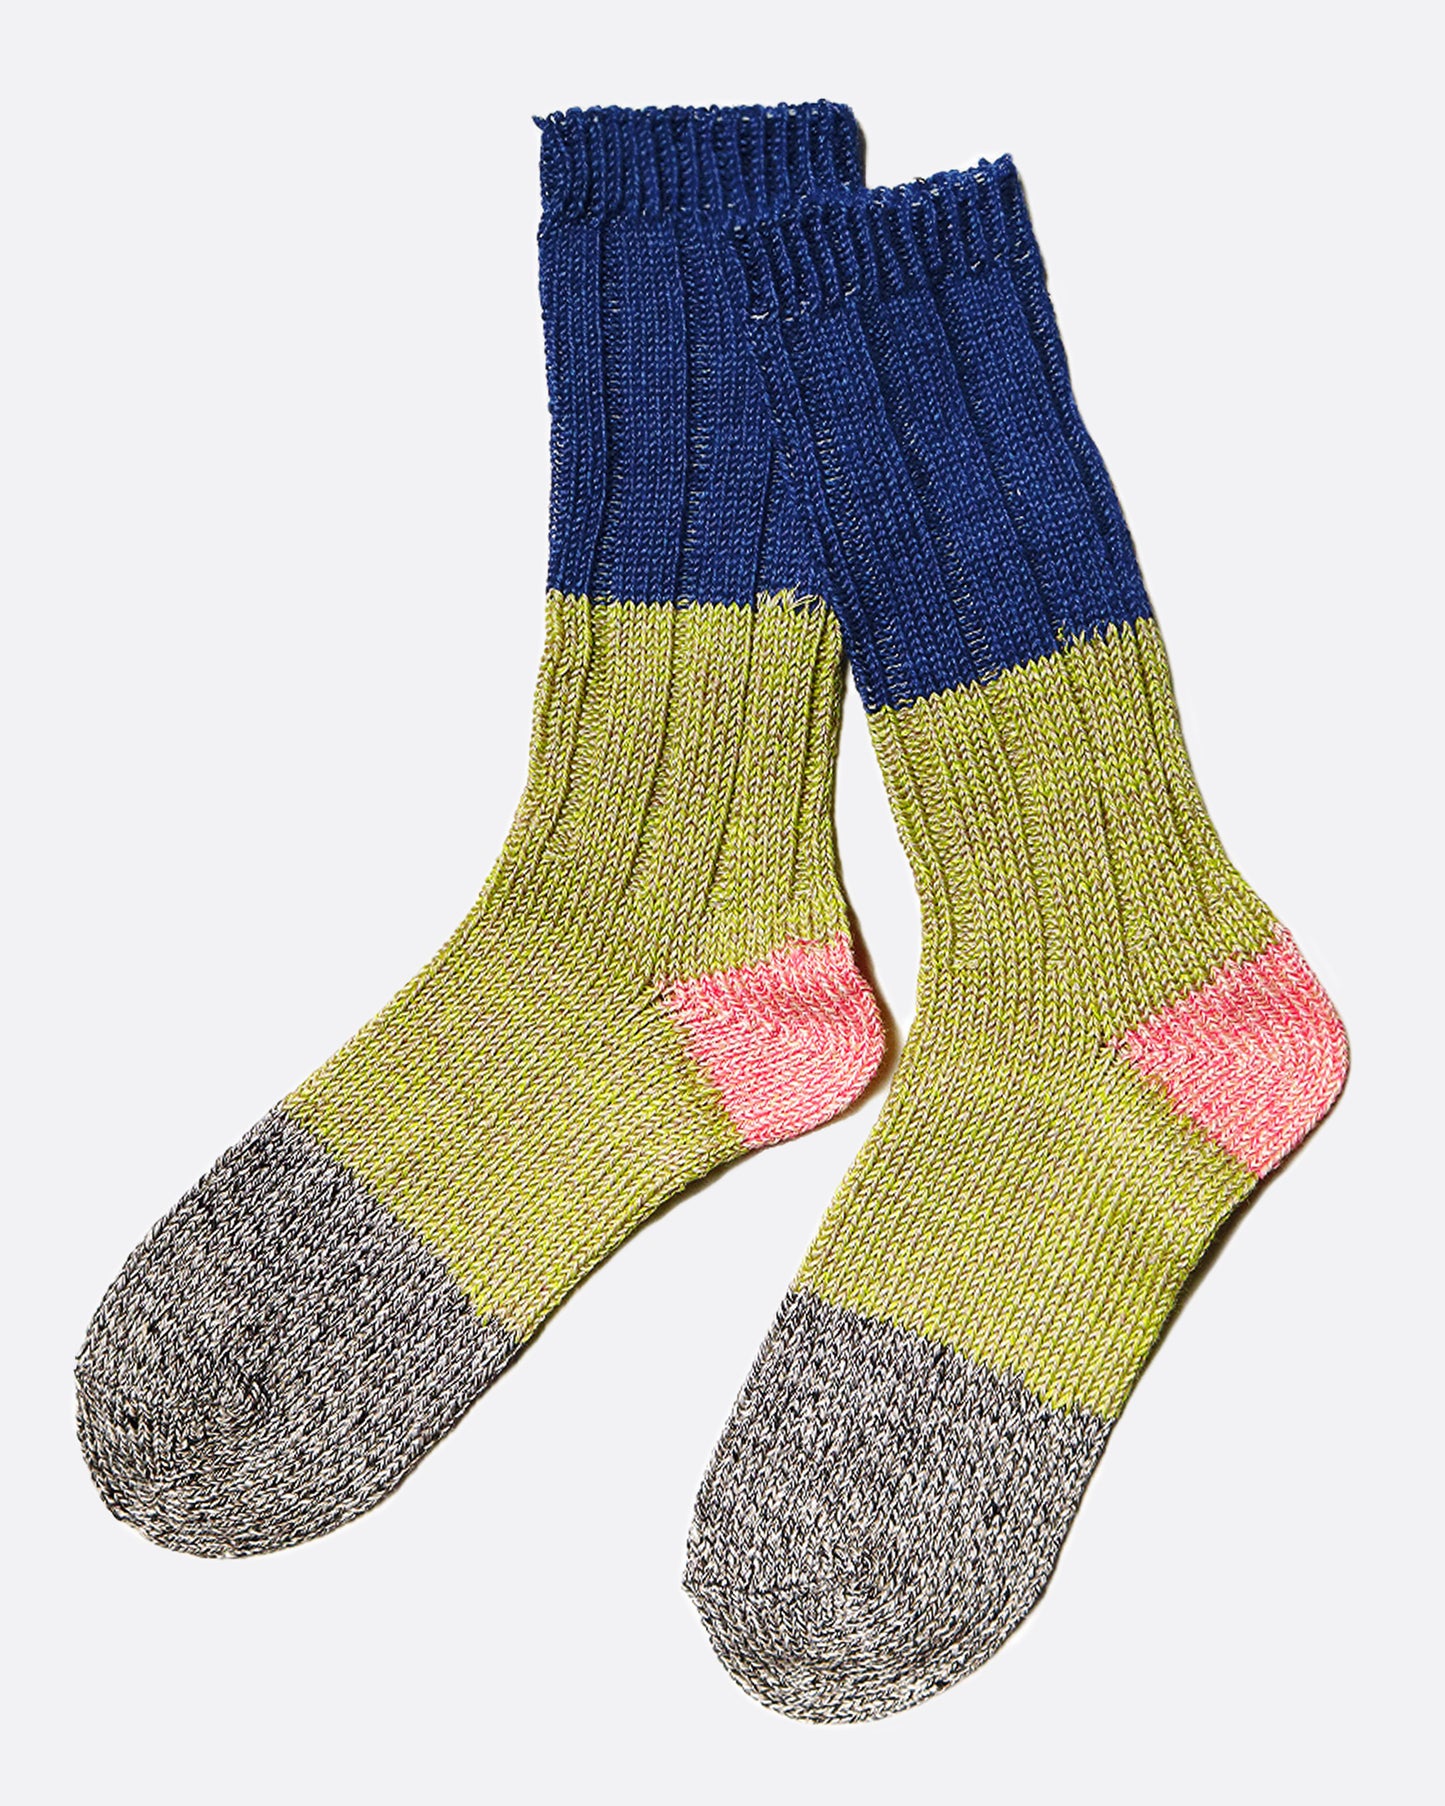 Color blocked linen tube socks in a mix of green, blue, gray and pink.